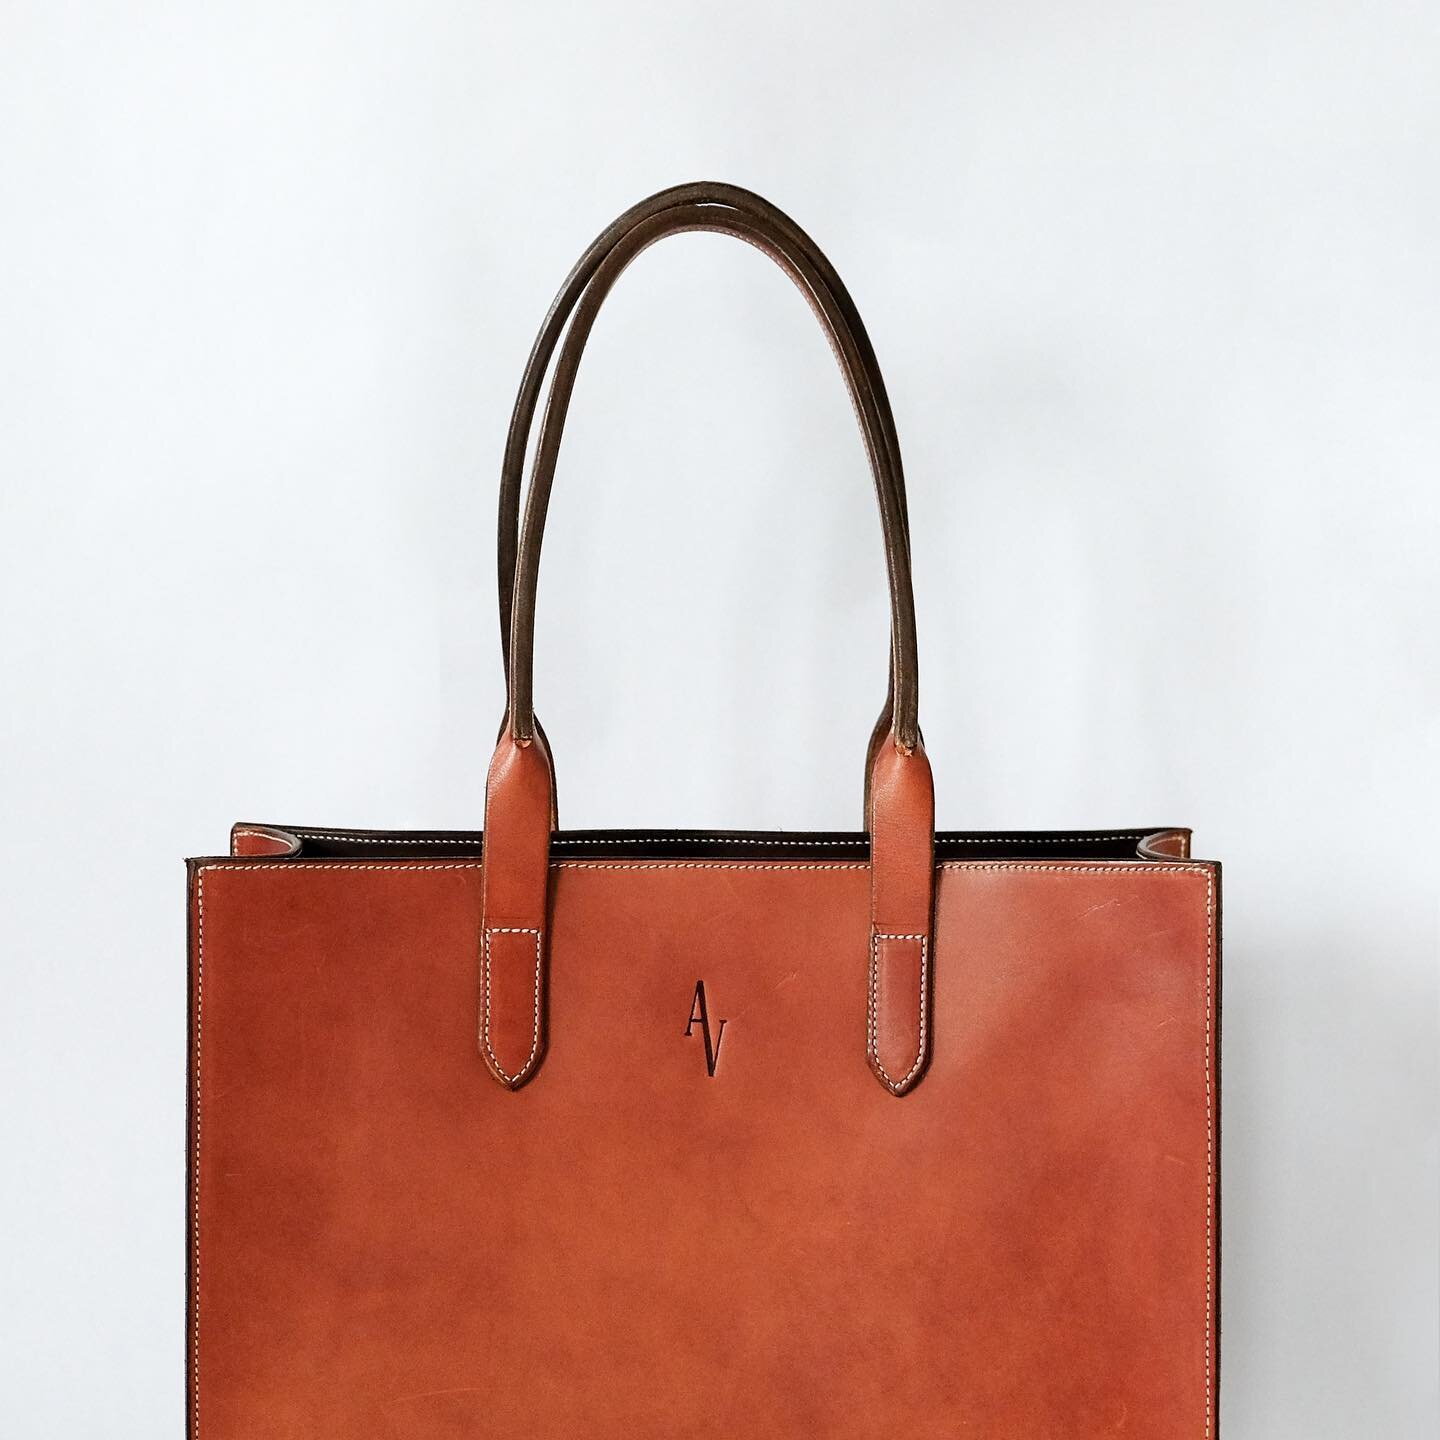 The Perfect Tote by AMY VIOLETTE.
Handmade in the USA.